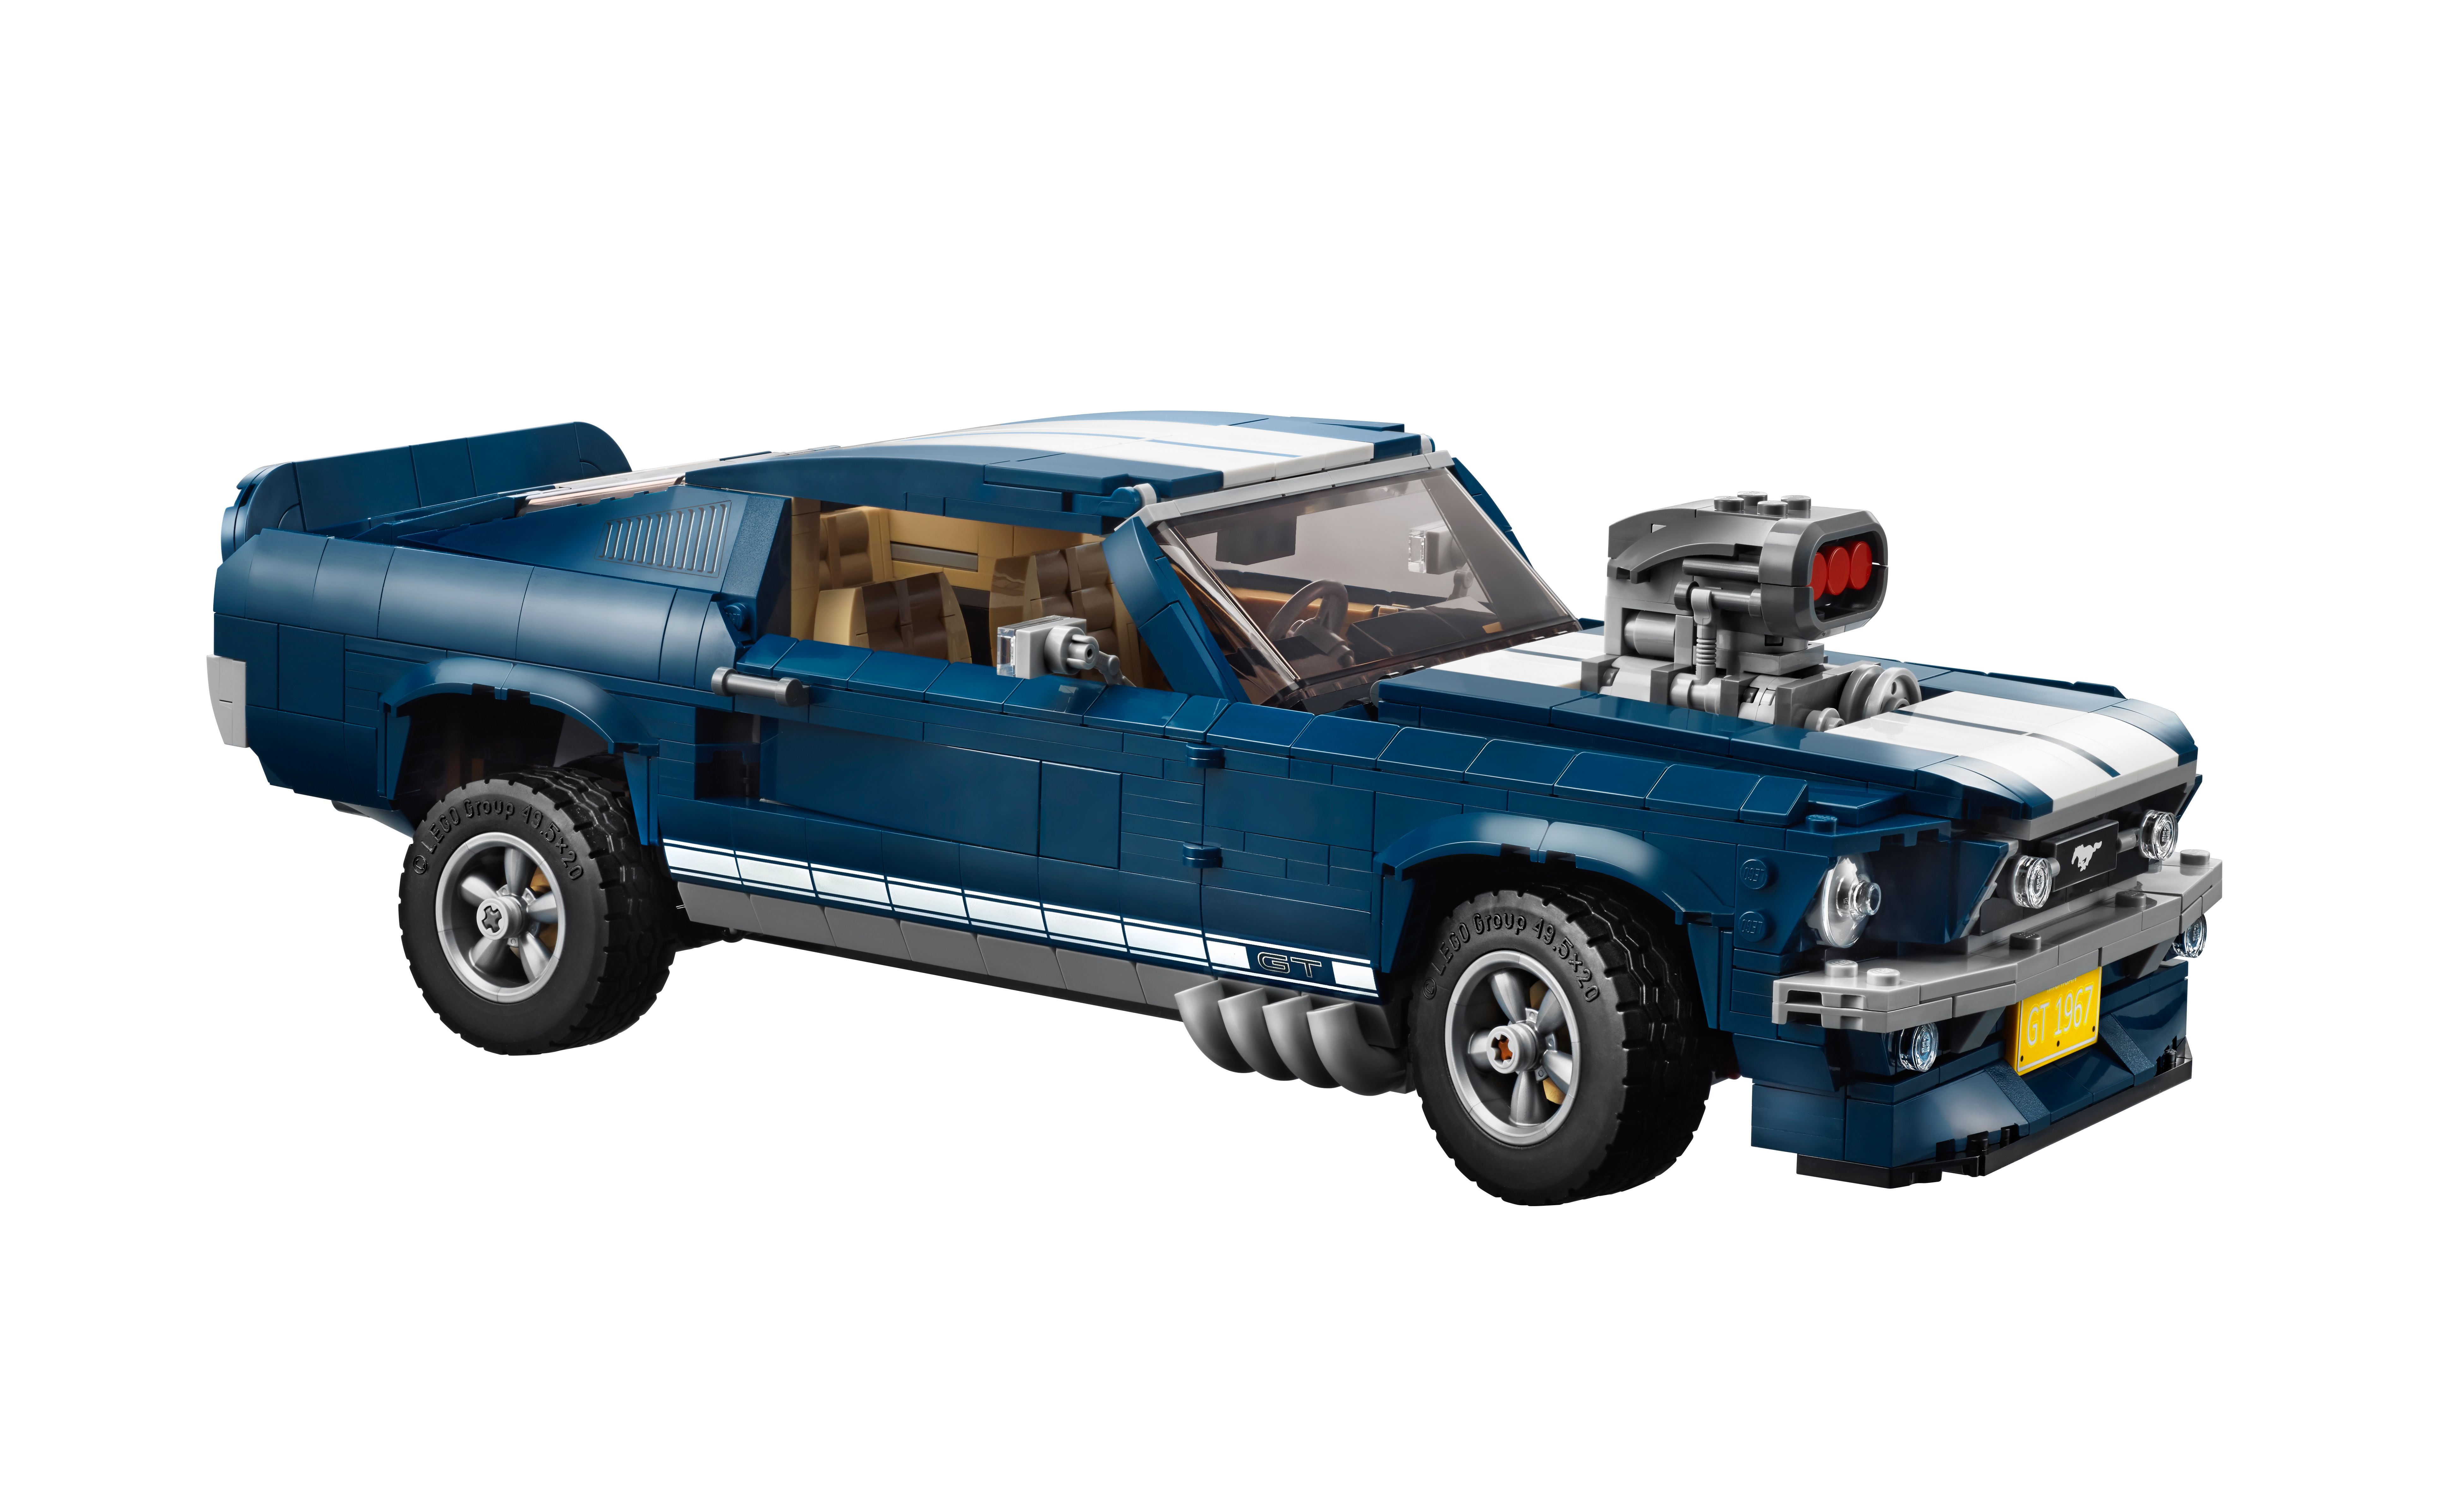 Lego Reveals 1967 Ford Mustang Fastback Kit